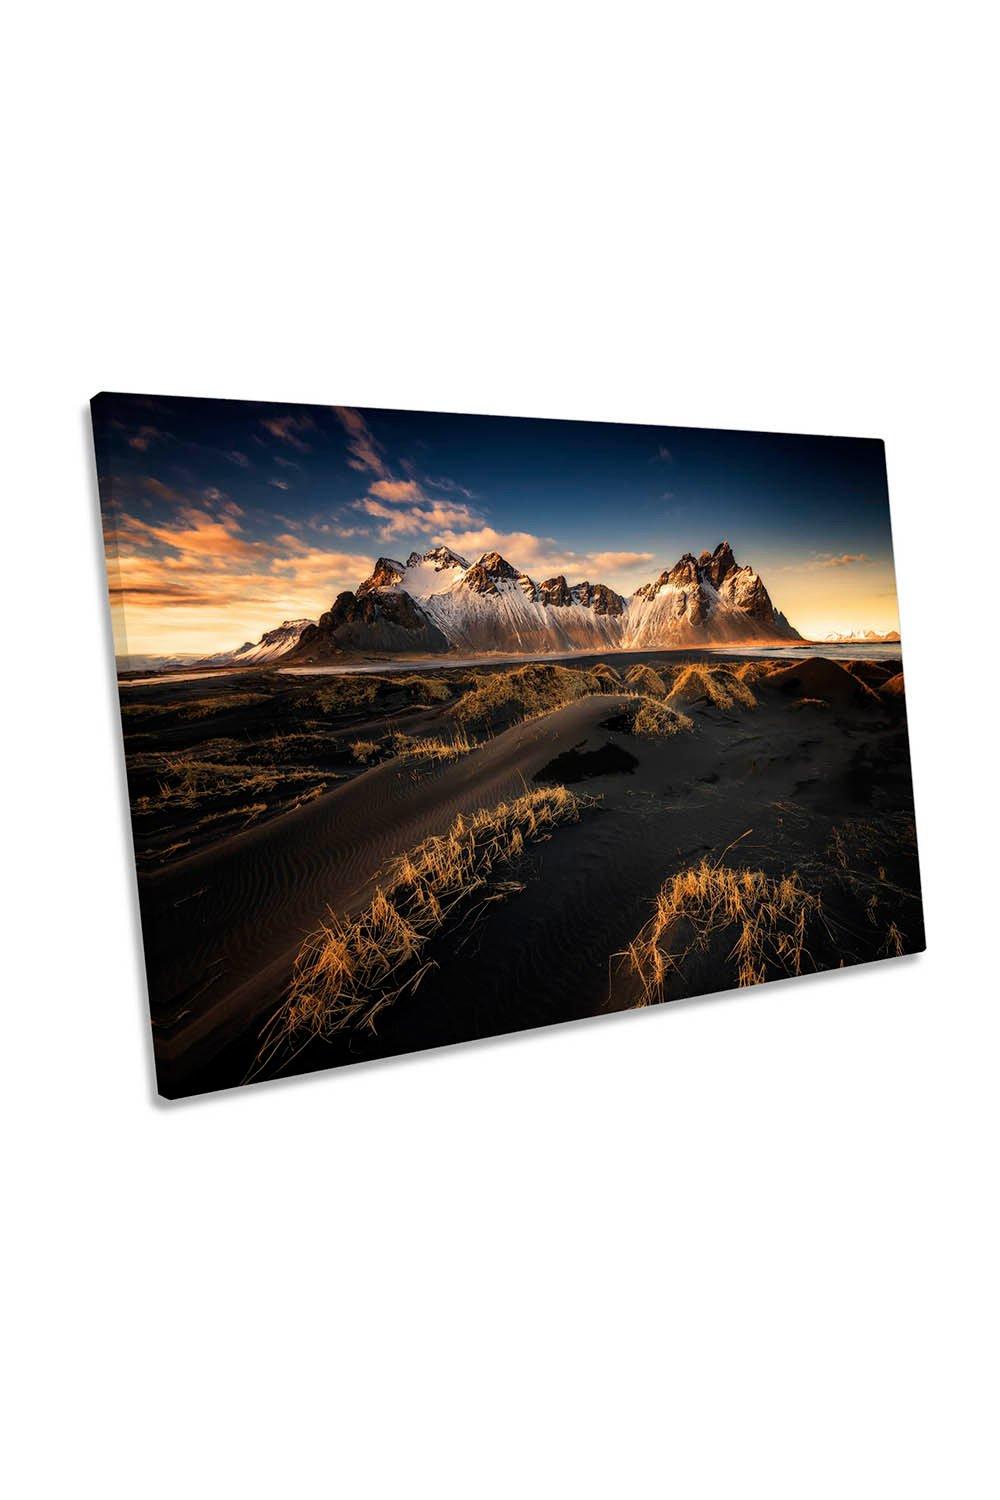 Mountains Iceland Landscape Sunset Canvas Wall Art Picture Print